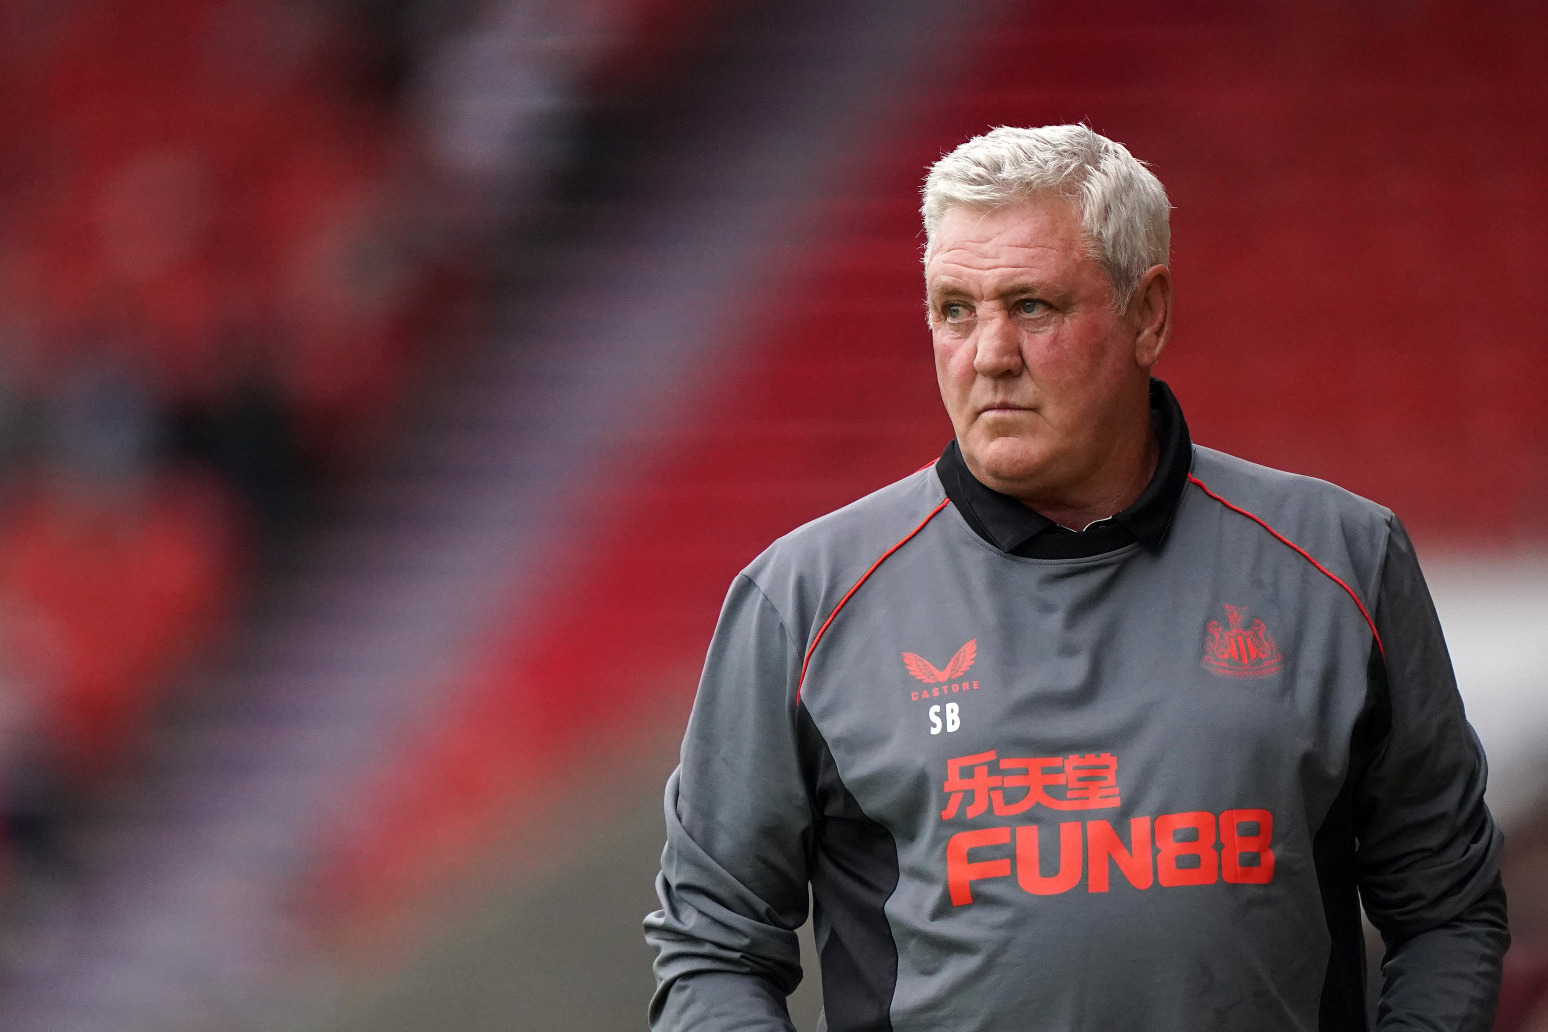 Alan Shearer thanks Steve Bruce for ‘effort and commitment’ after Newcastle exit 